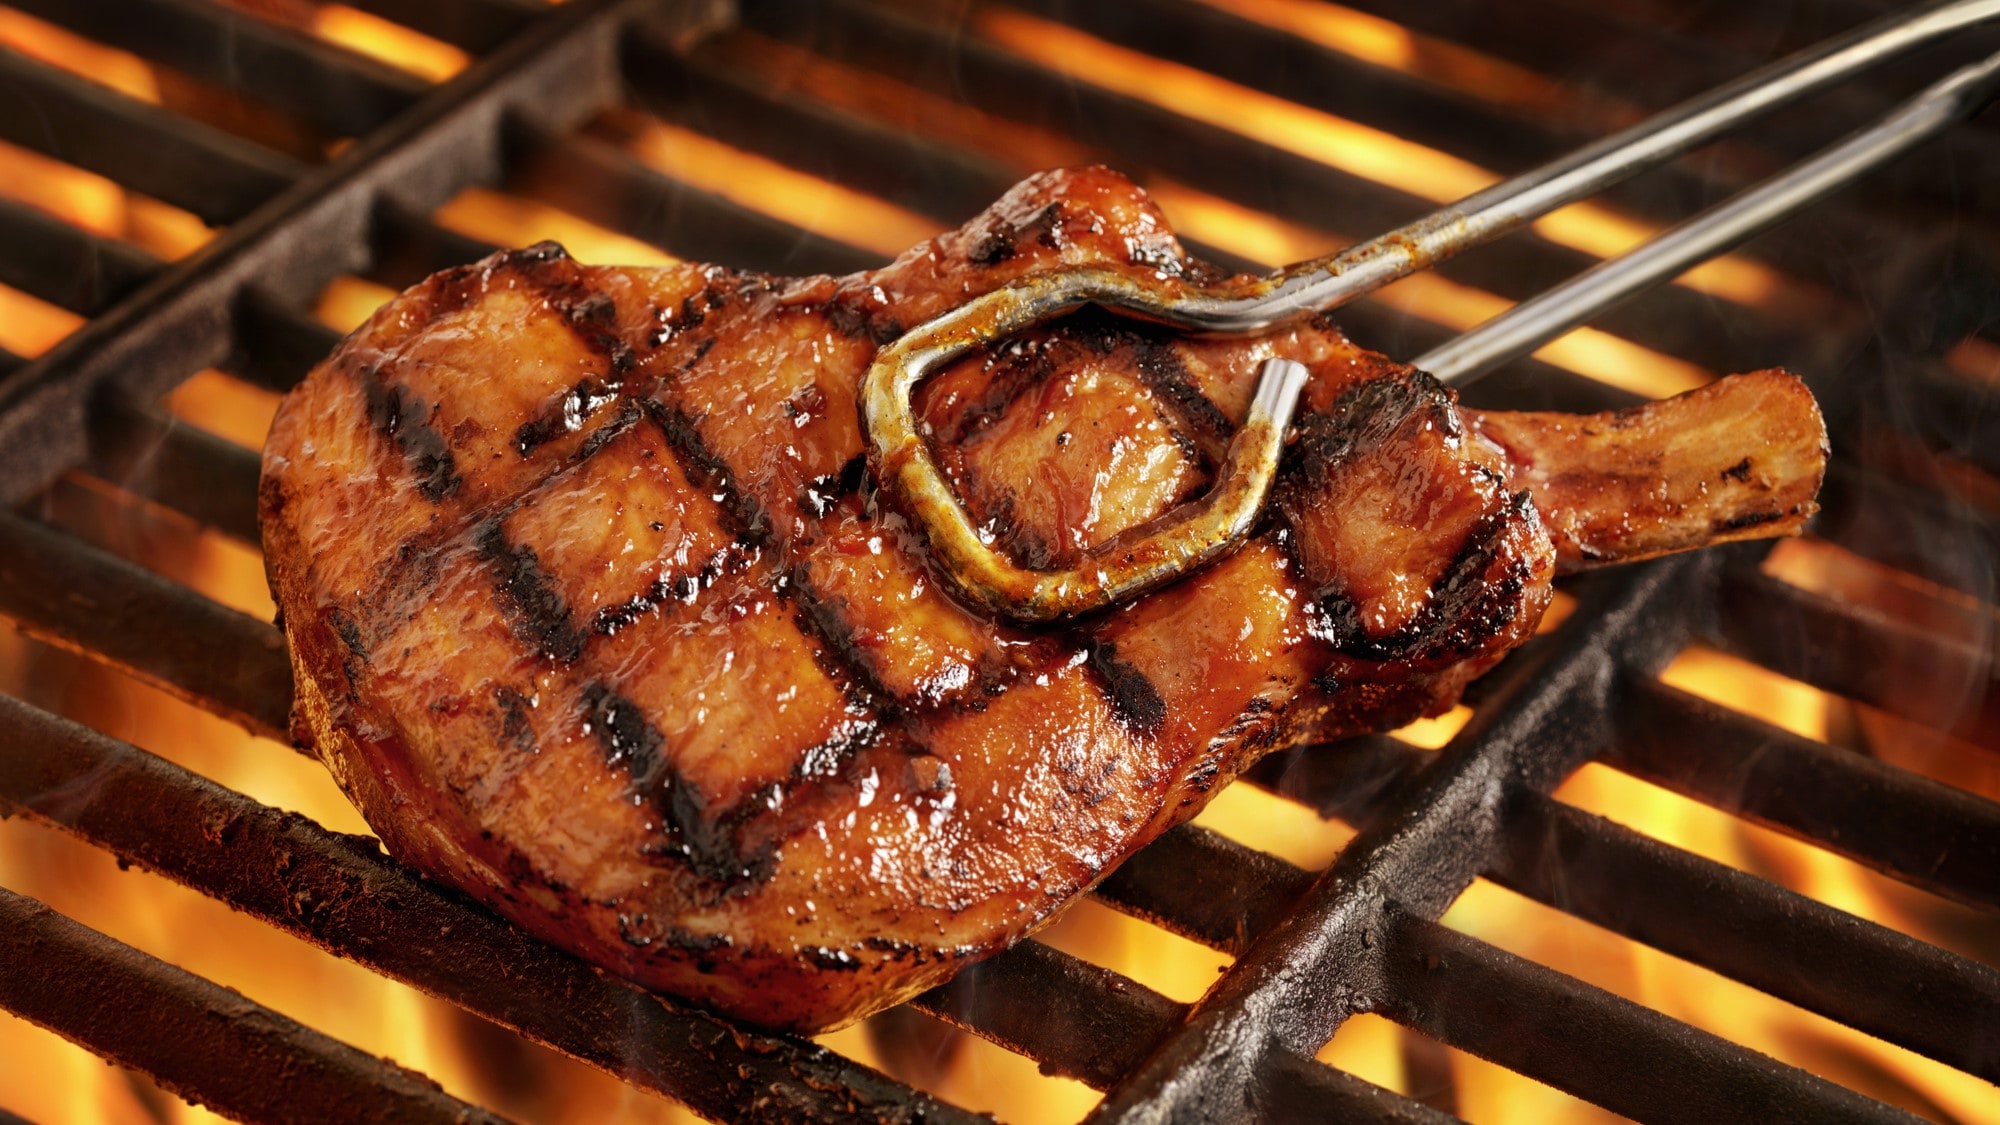 A pork chop on a hot grill with grill marks in both directions being held by a pair of tongs.